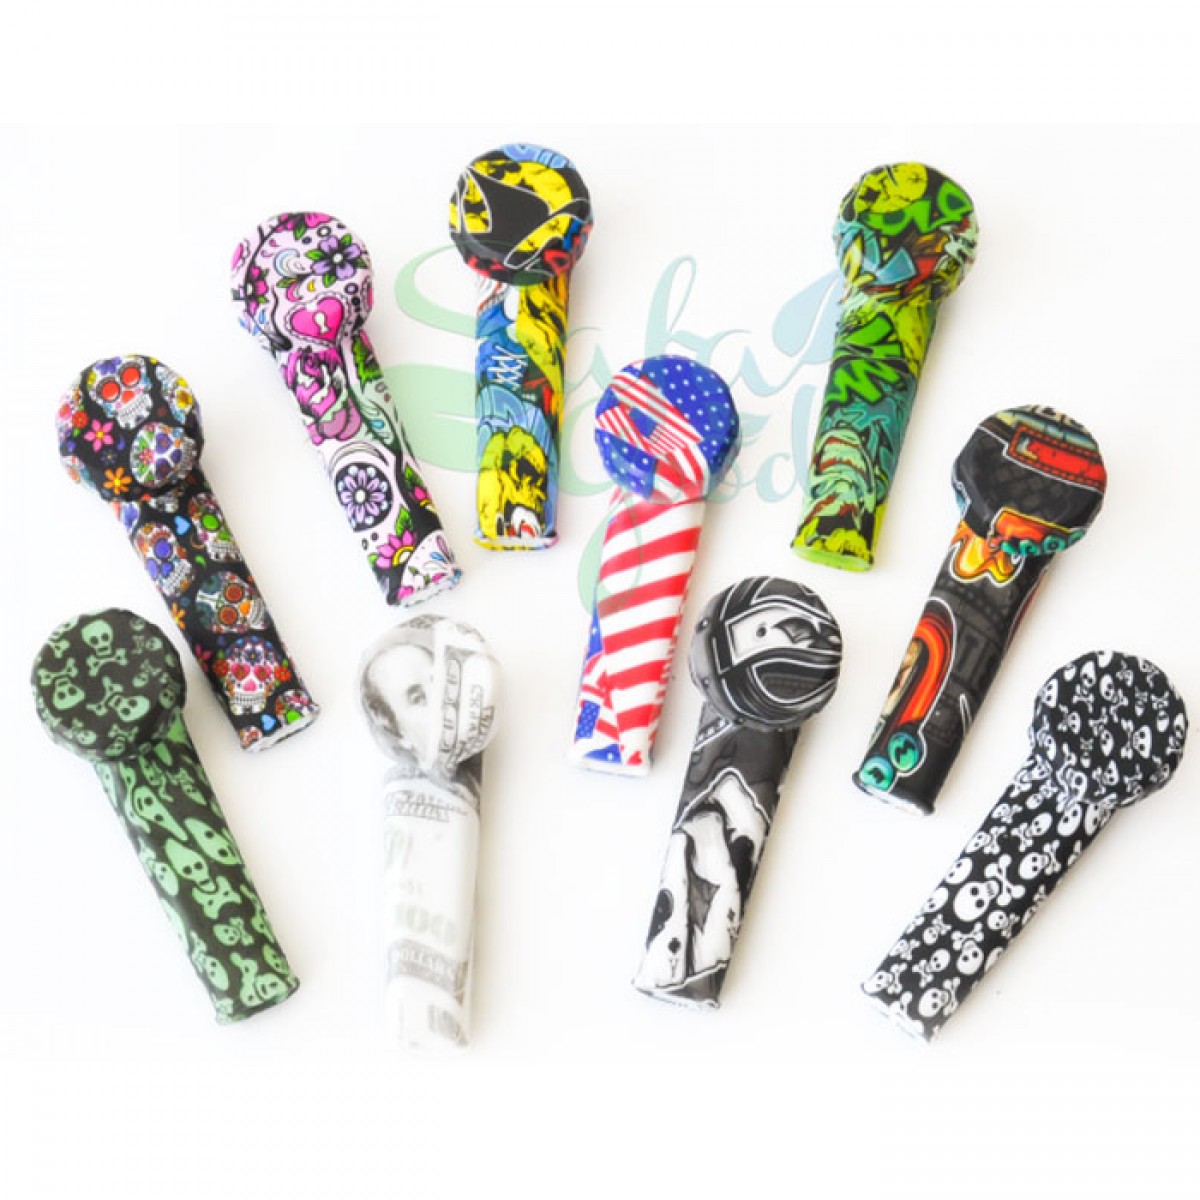 3.5 Inch Silicone Hand Pipes Metal Bowl Cap Printed Designs